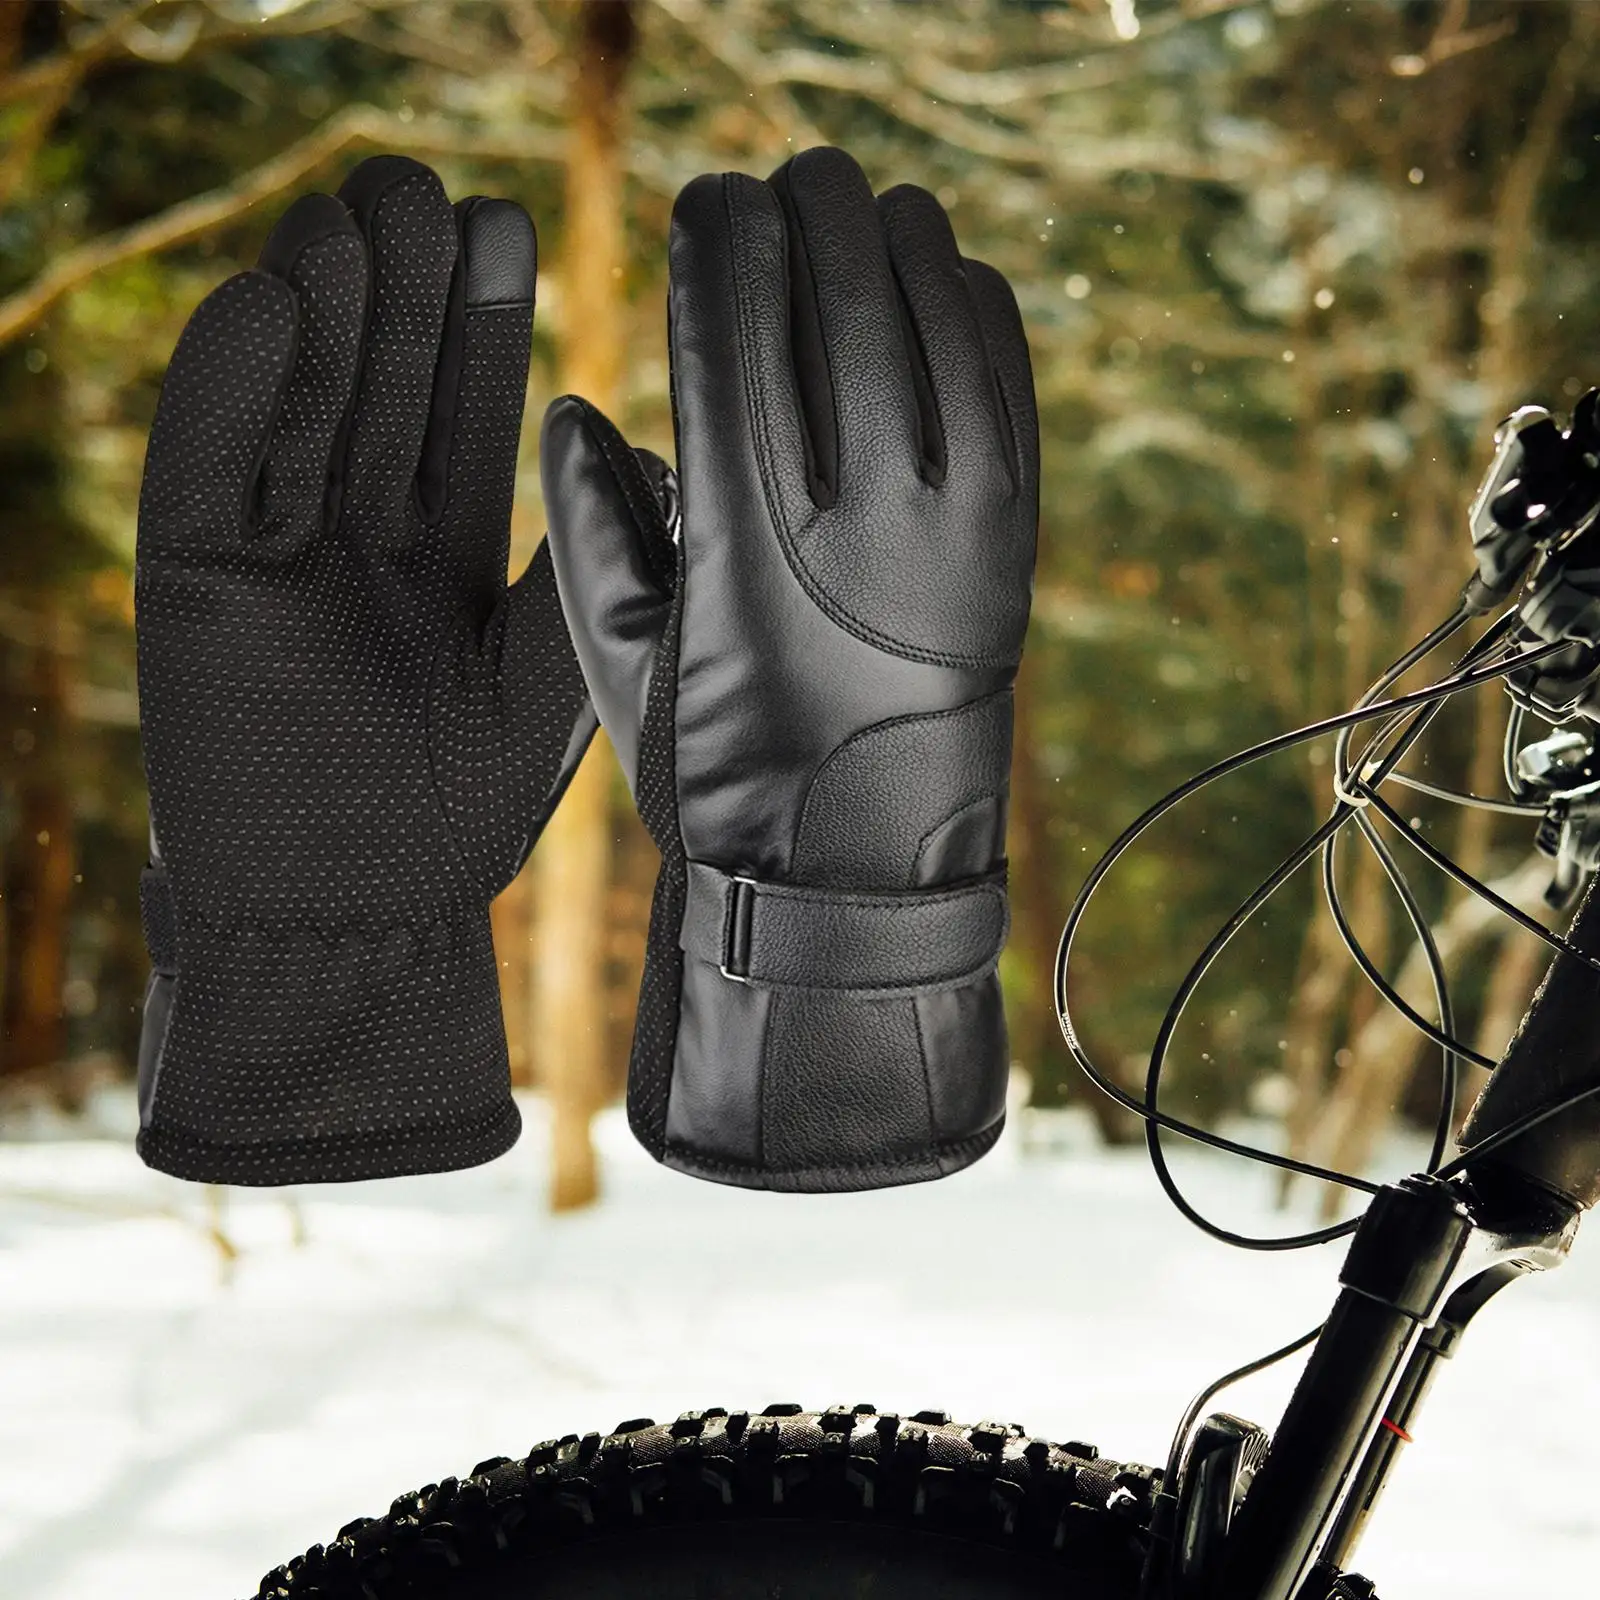 Full Finger Winter Touchscreen Gloves Water Resistant Thermal Outdoor Cold Weather Mittens for Driving Bike Walking Ski Snow